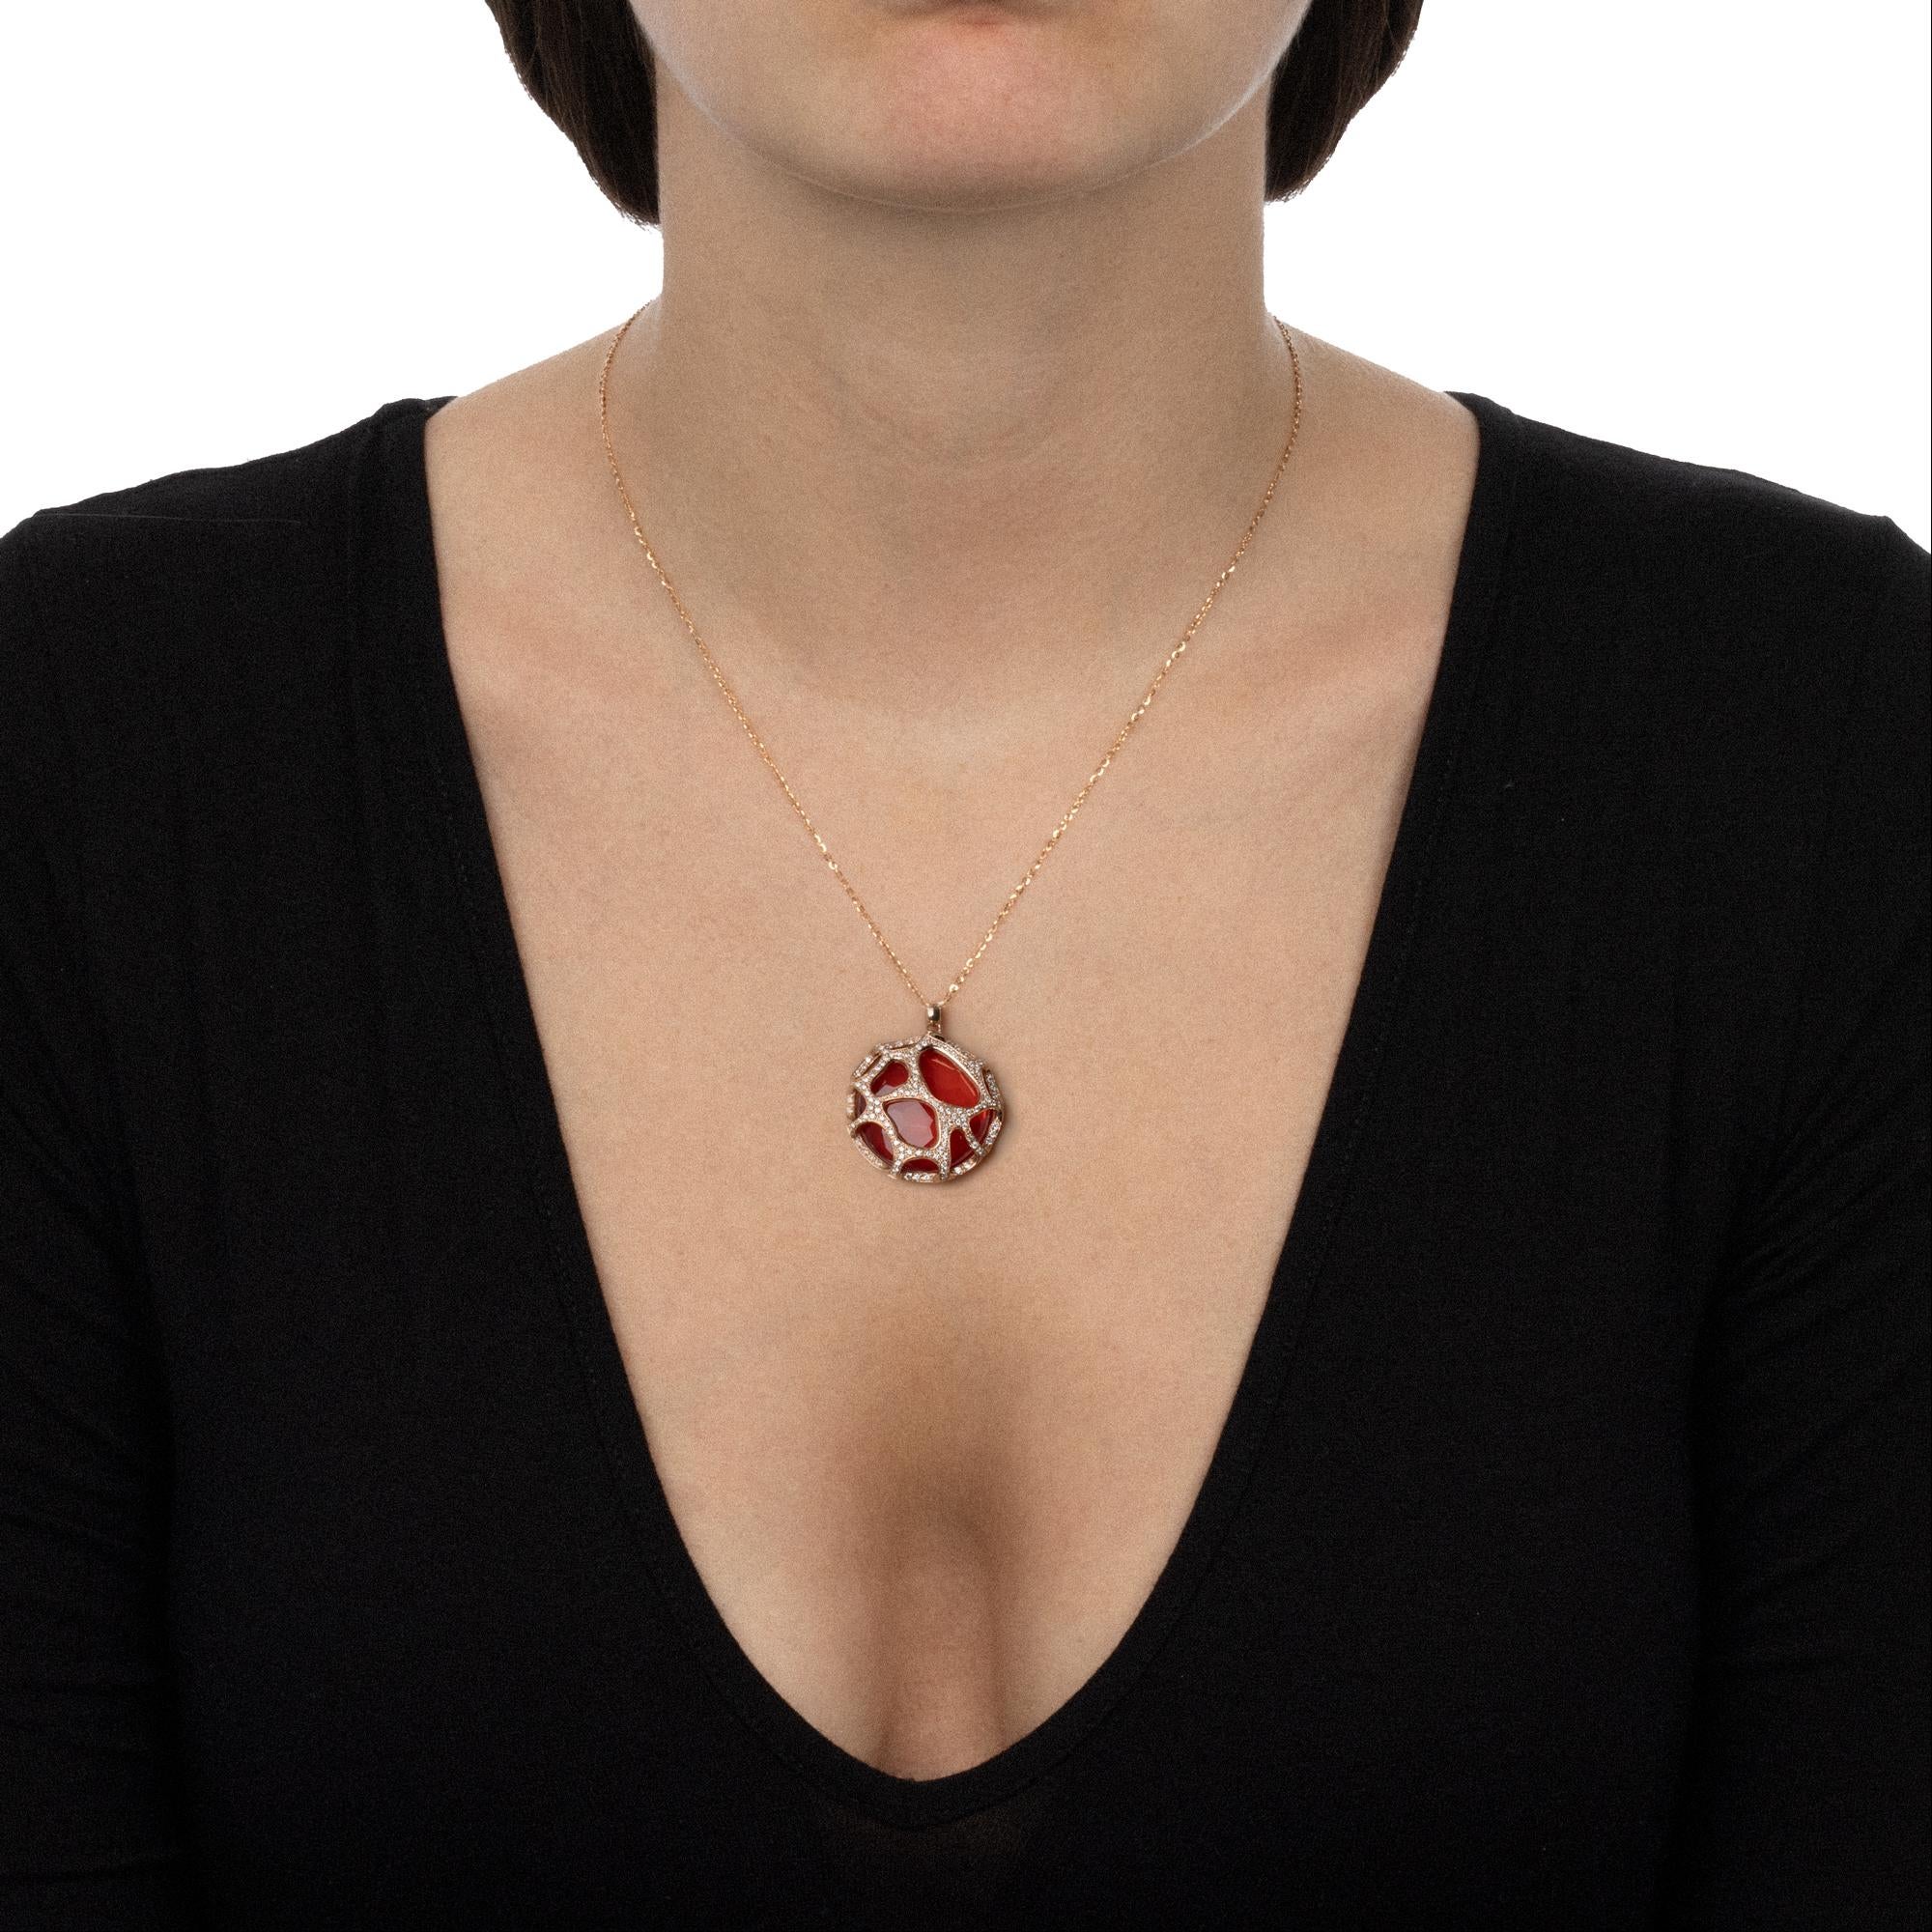 A playful, yet classy pendant necklace that captures the fresh joy of a summer holiday. The vibrant red shade of the crystal pendant is highlighted by the sparkling brightness of the small diamonds. The delightfully elegant rose gold decoration and